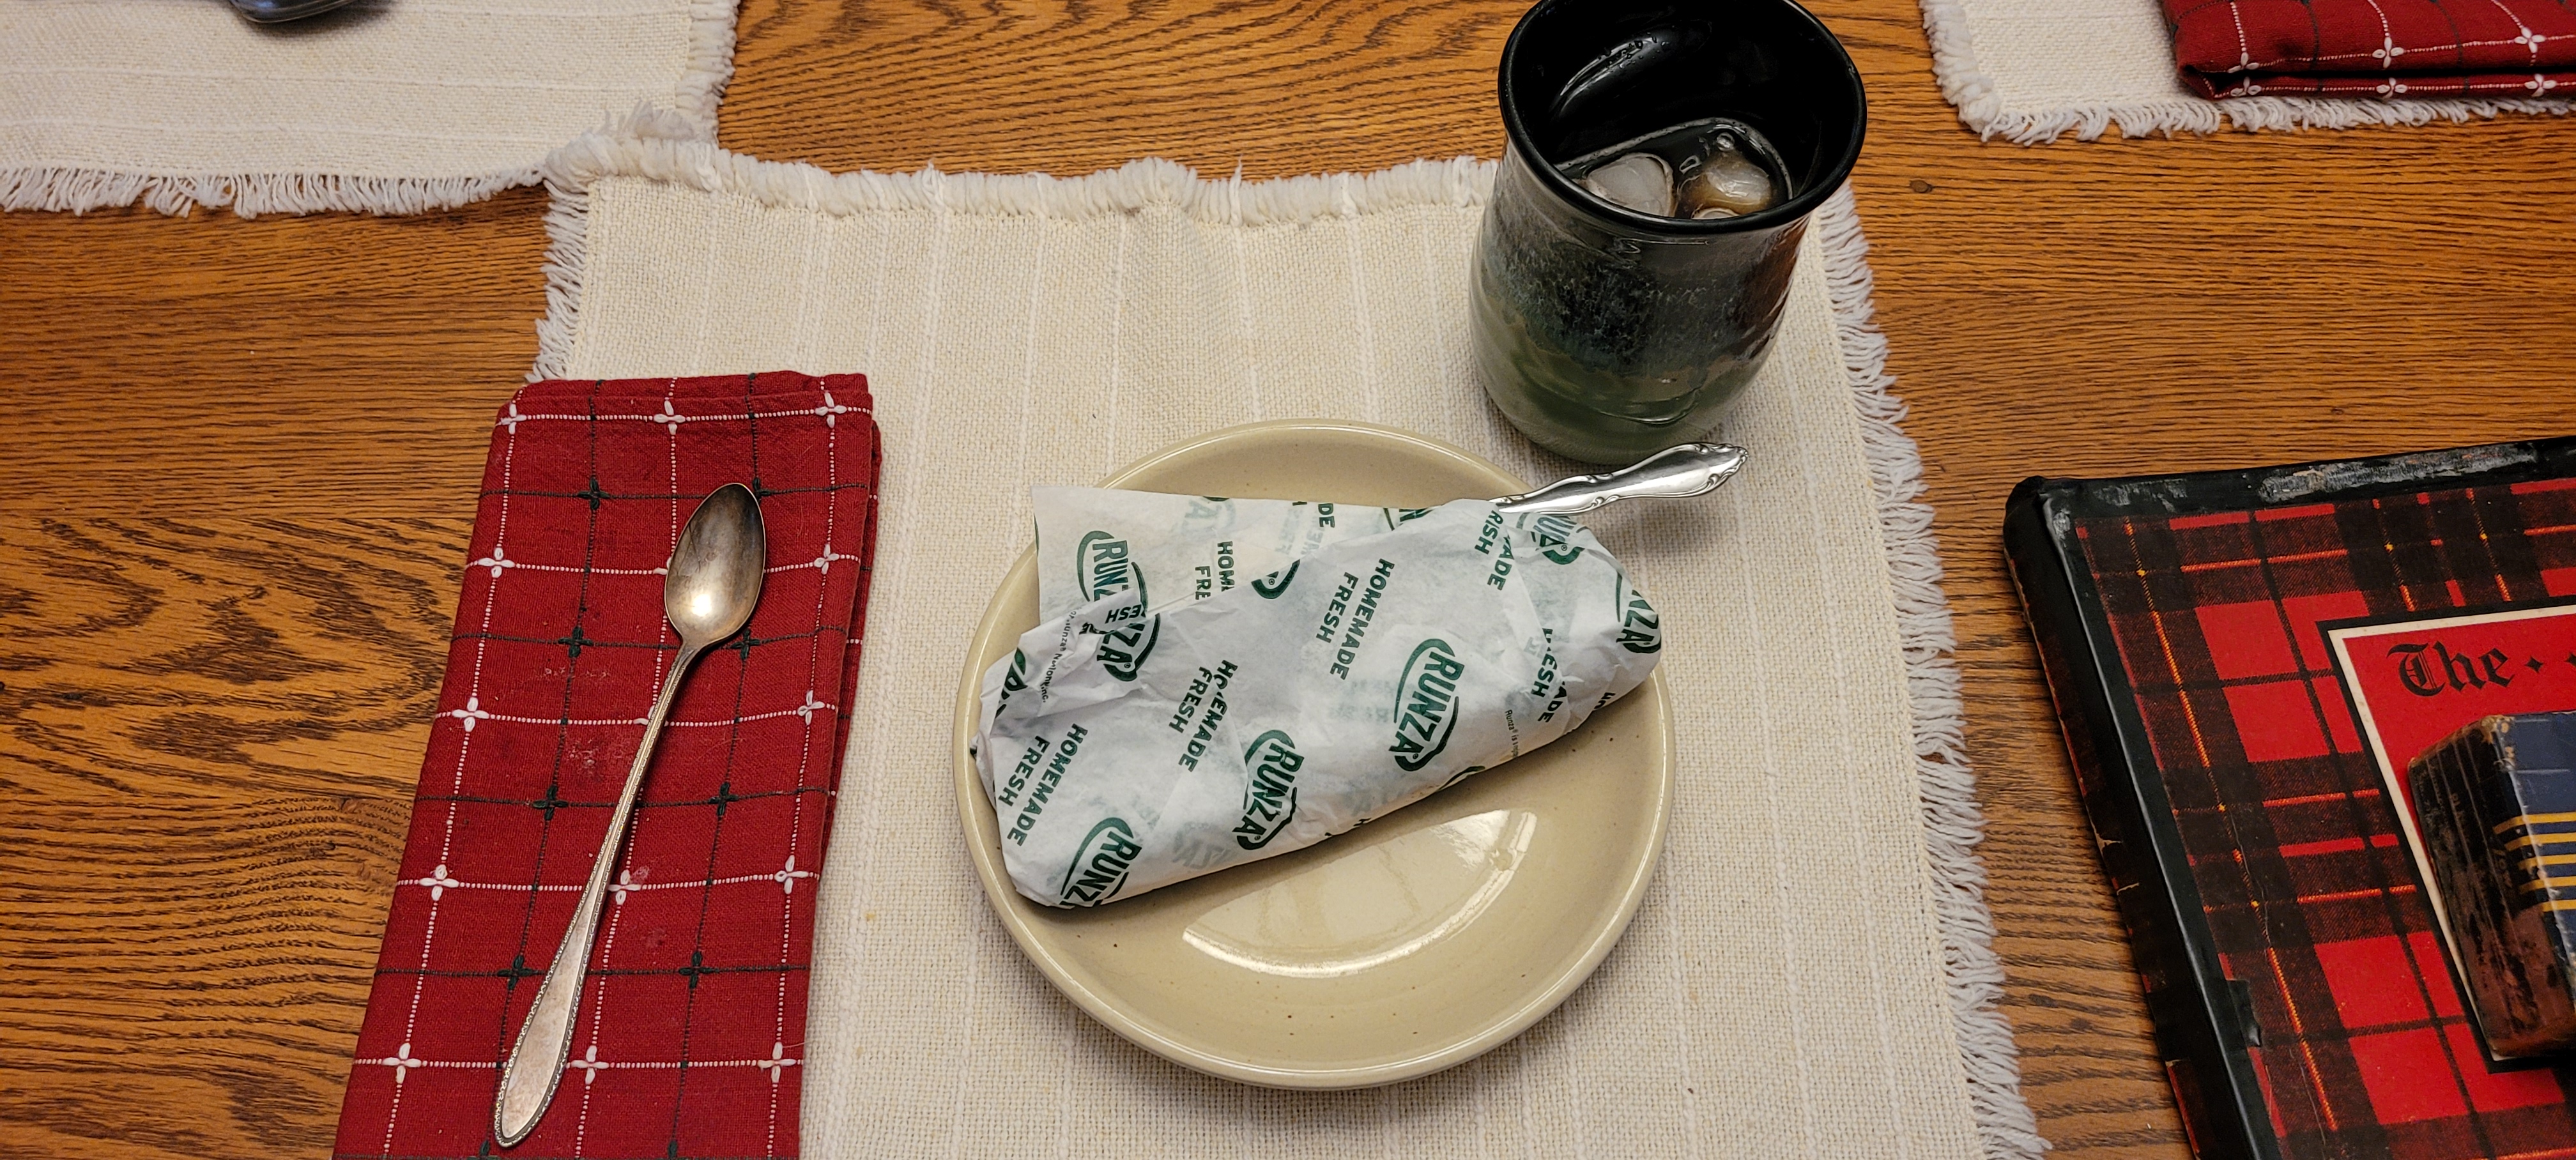 A Runza still wrapped.